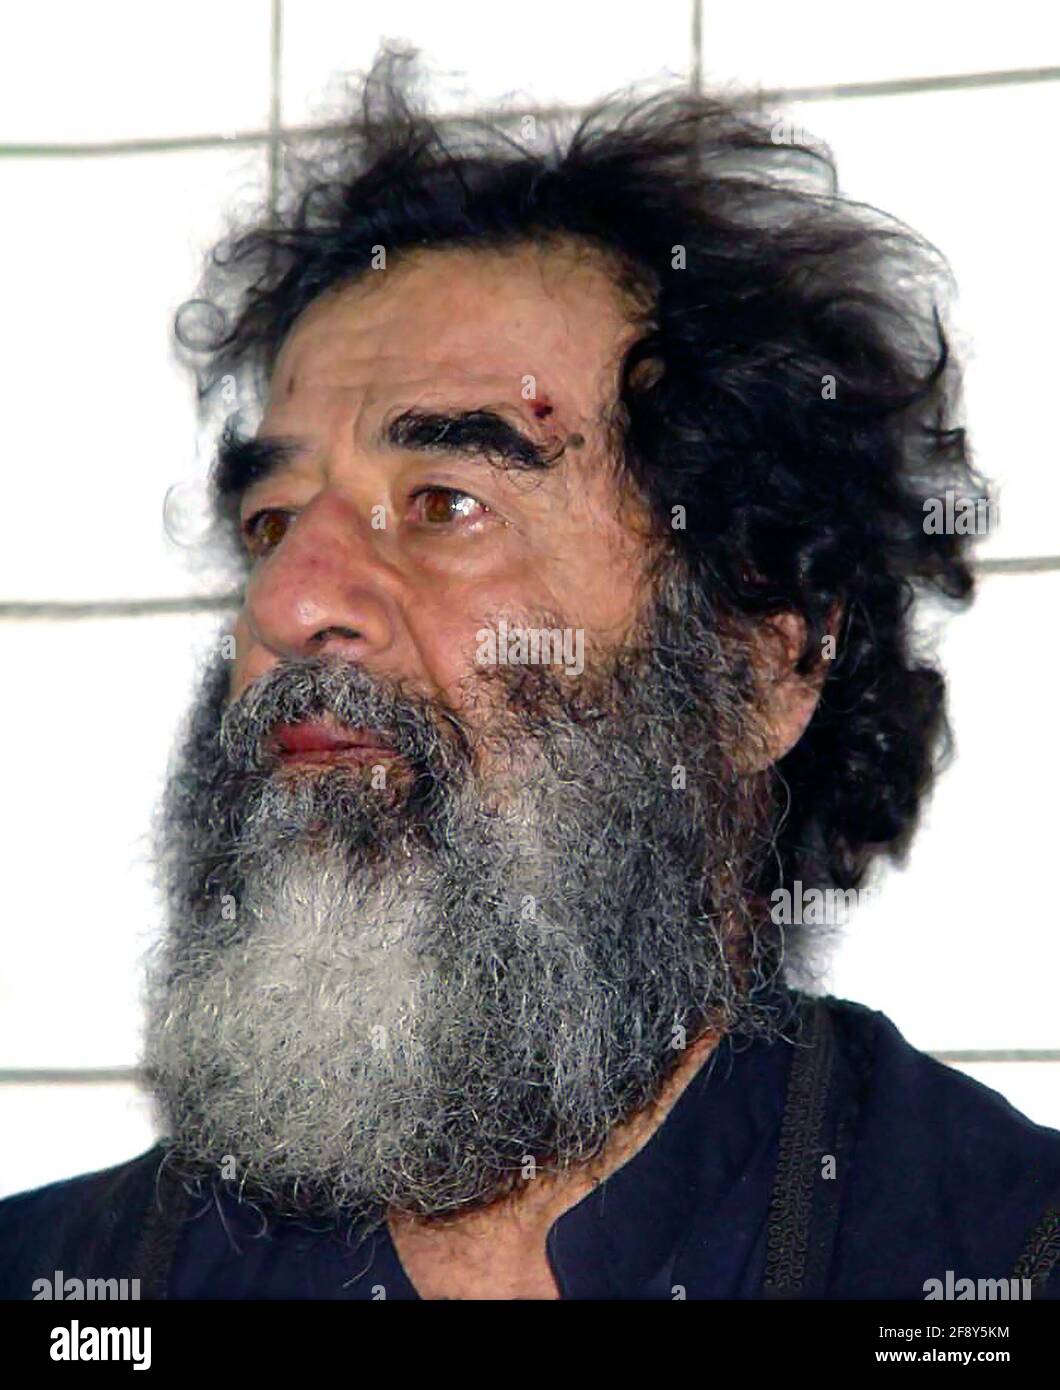 Saddam Hussein. Portrait of the former President of Iraq, Saddam Hussein Abd al-Majid al-Tikriti 1937-2006). US Army photograph taken shortly after his capture in Tikrit, Iraq in 2003. Stock Photo